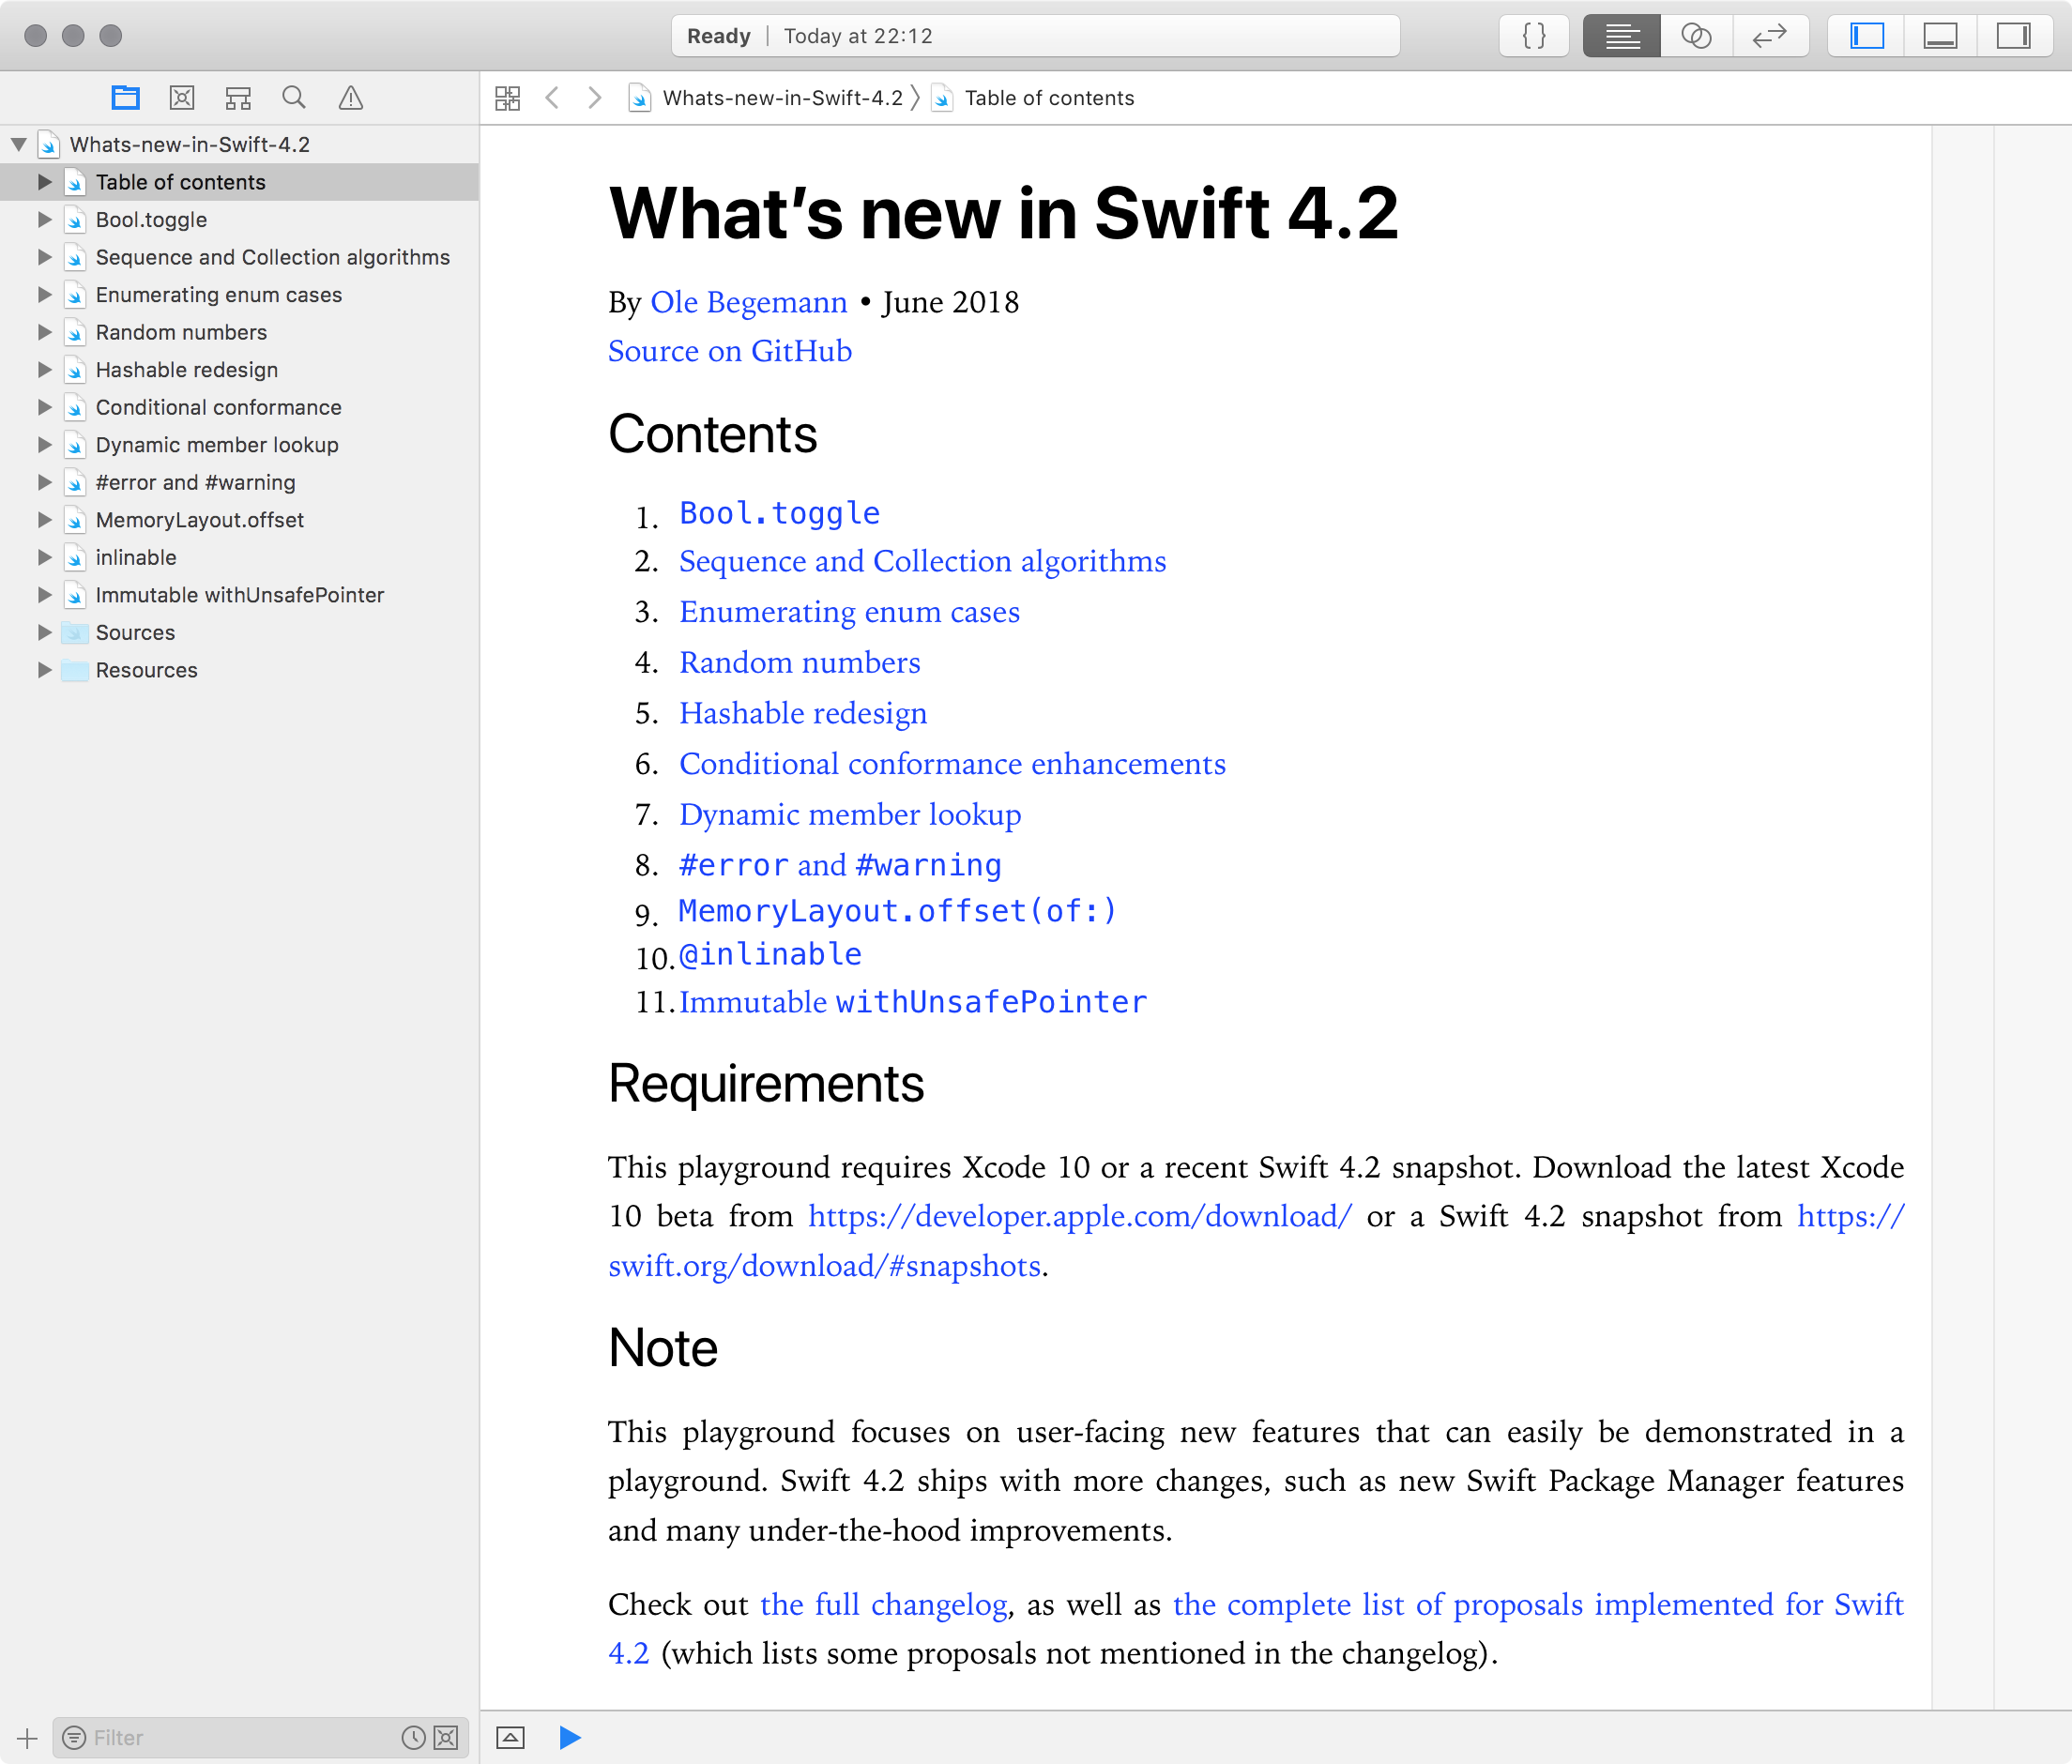 Screenshot of the tables of contents